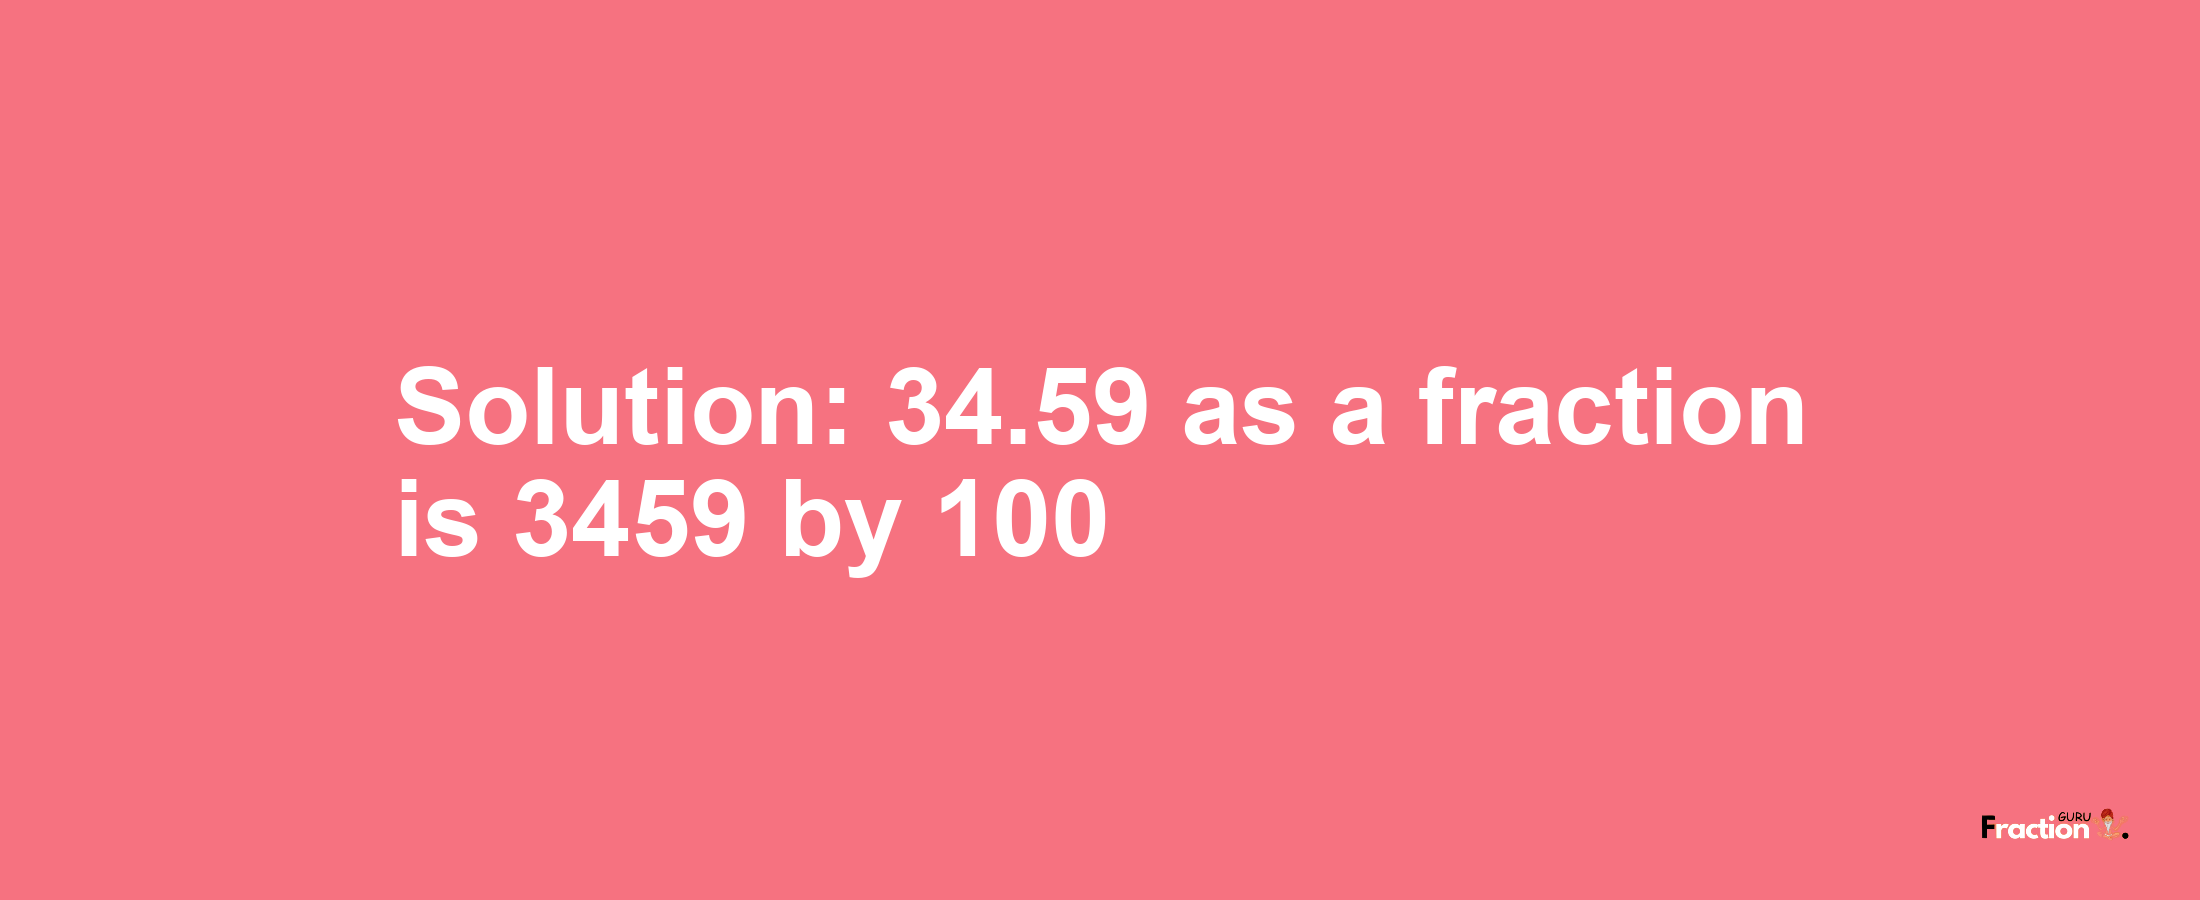 Solution:34.59 as a fraction is 3459/100